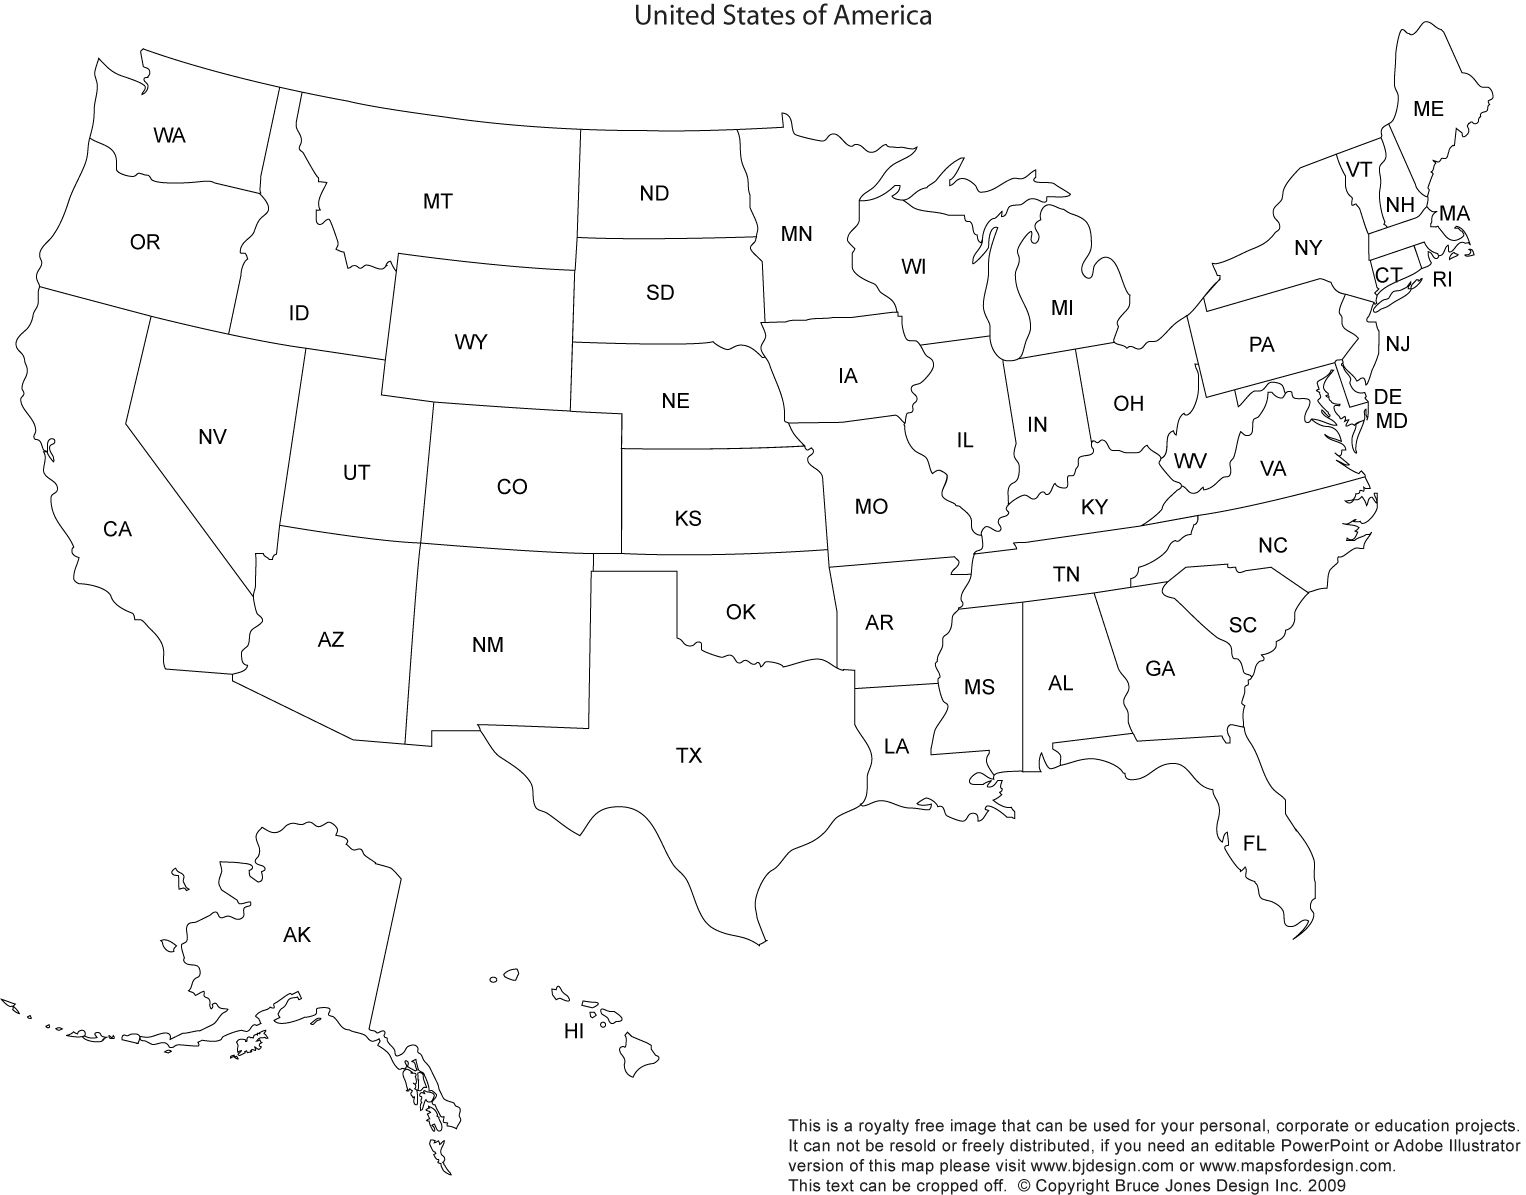 Print Out A Blank Map Of The Us And Have The Kids Color In States - Free Printable Outline Map Of United States